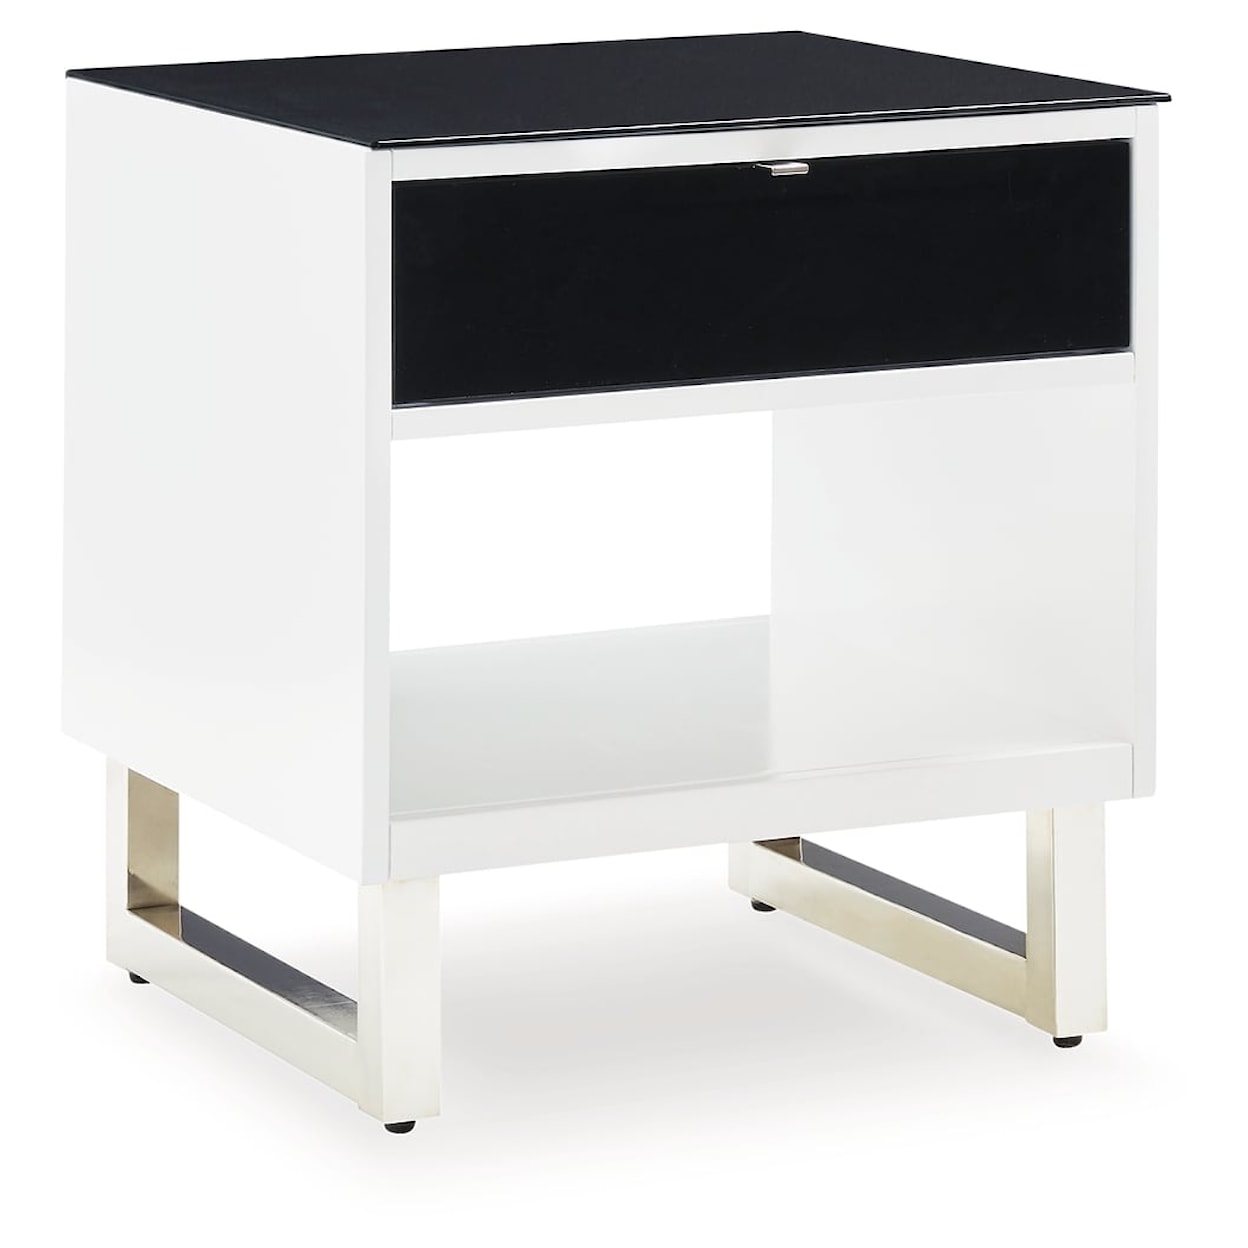 Signature Design by Ashley Furniture Gardoni Coffee Table and 2 End Tables